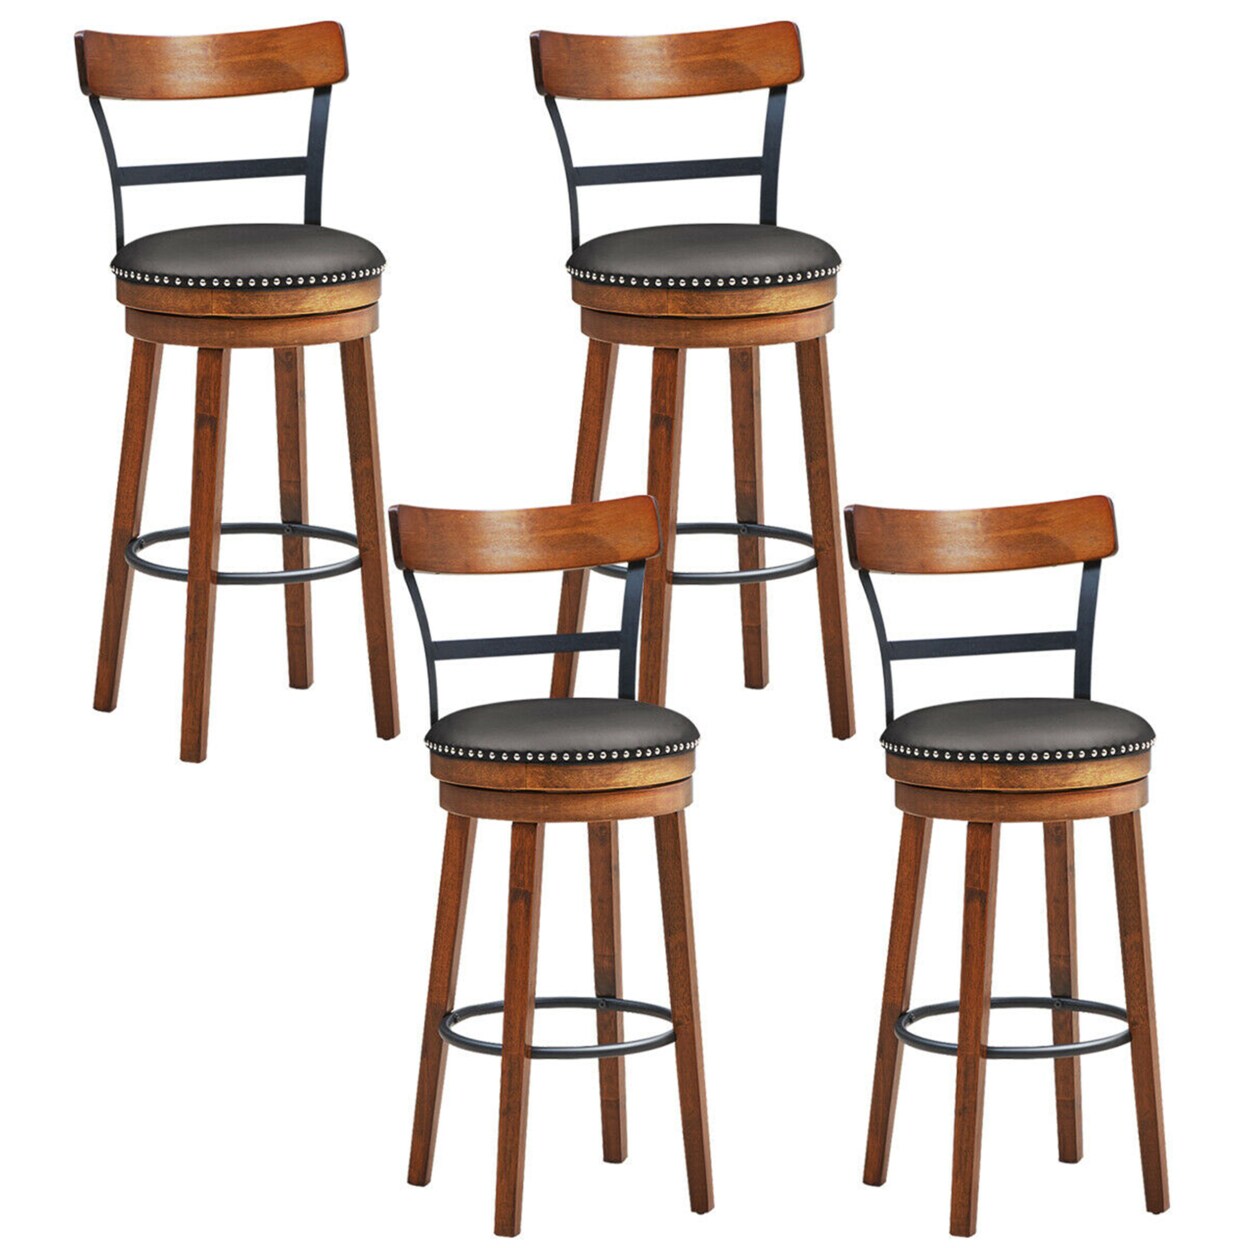 Gymax Set of 4 BarStool 30.5 Swivel Pub Height Dining Chair with Rubber Wood Legs